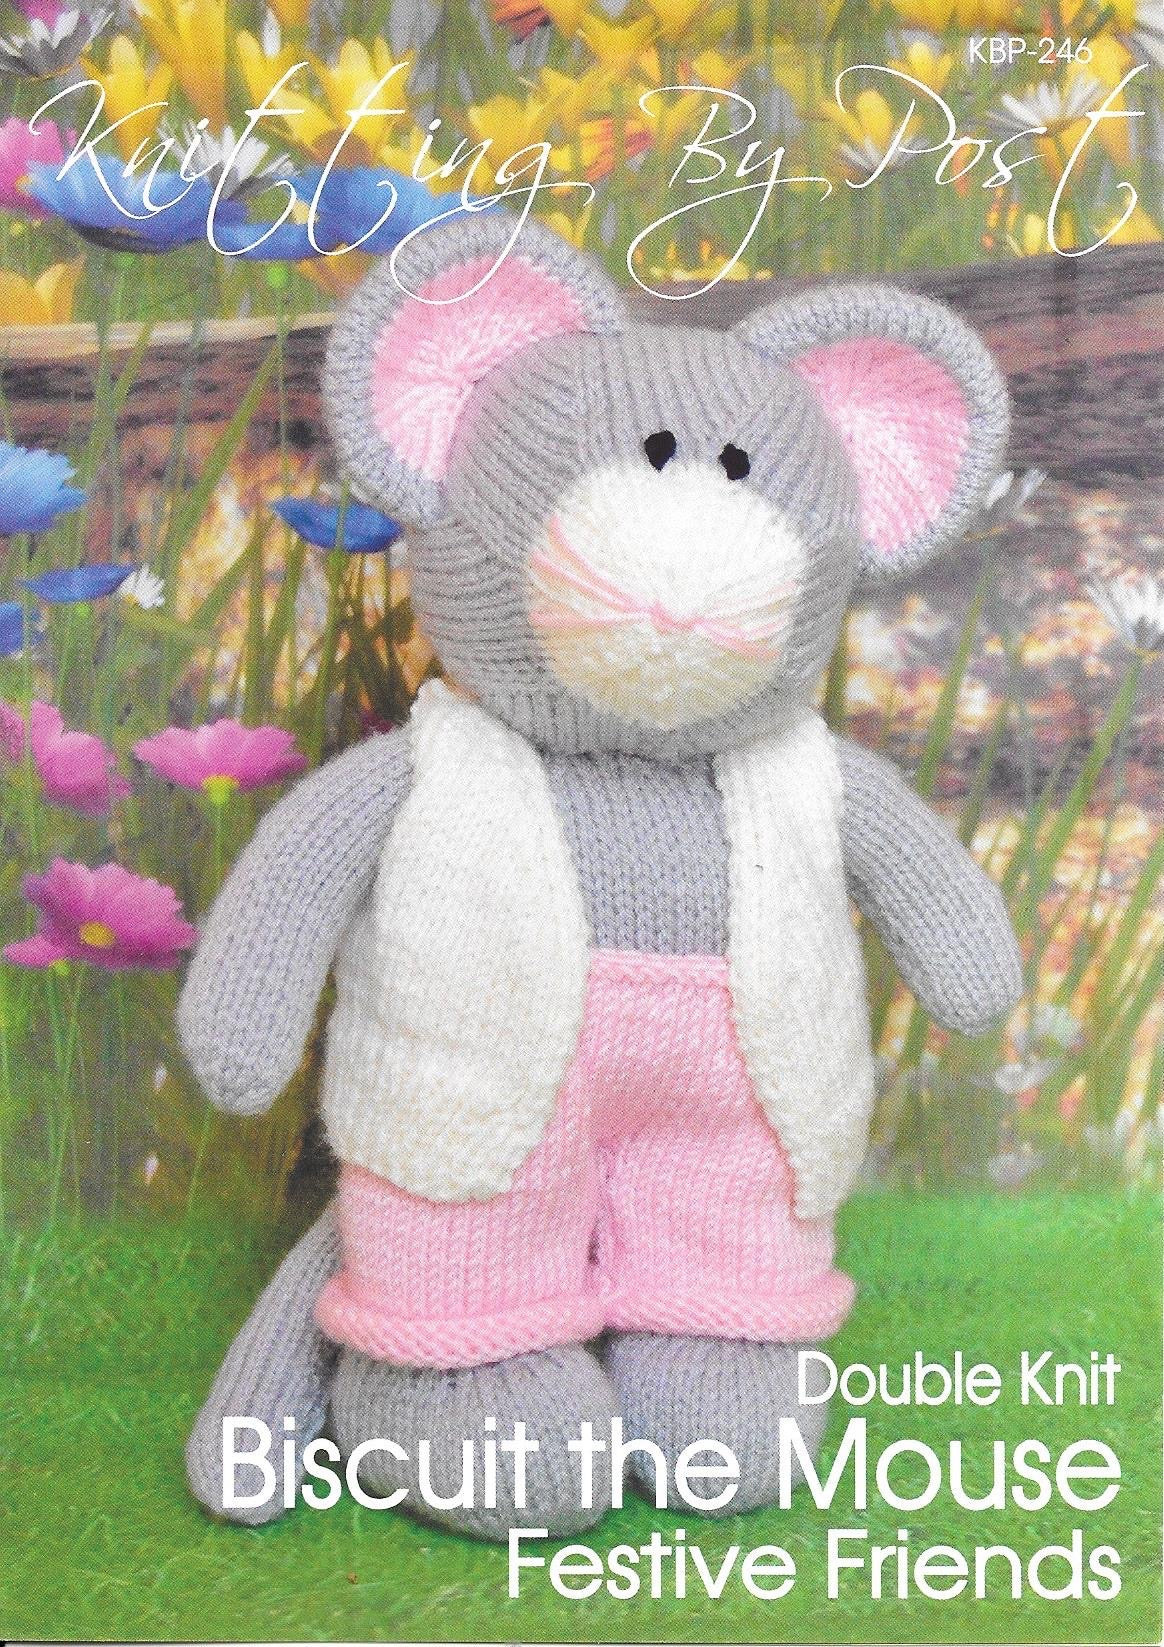 KBP-246 Biscuit the Mouse Festive Friends toy in DK knitting pattern